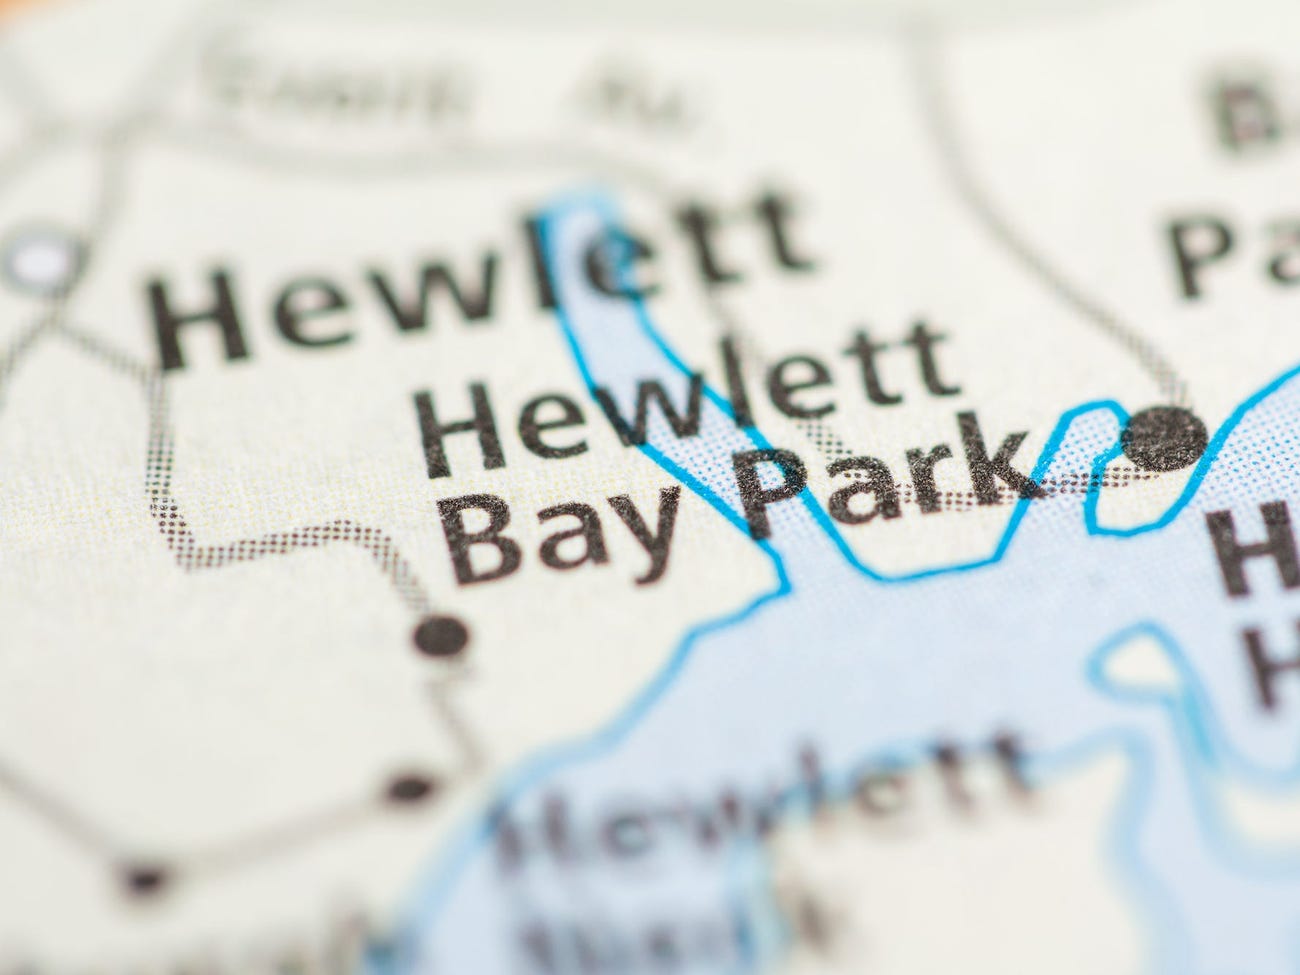 Part of a map showing Hewlett Bay Park, New York